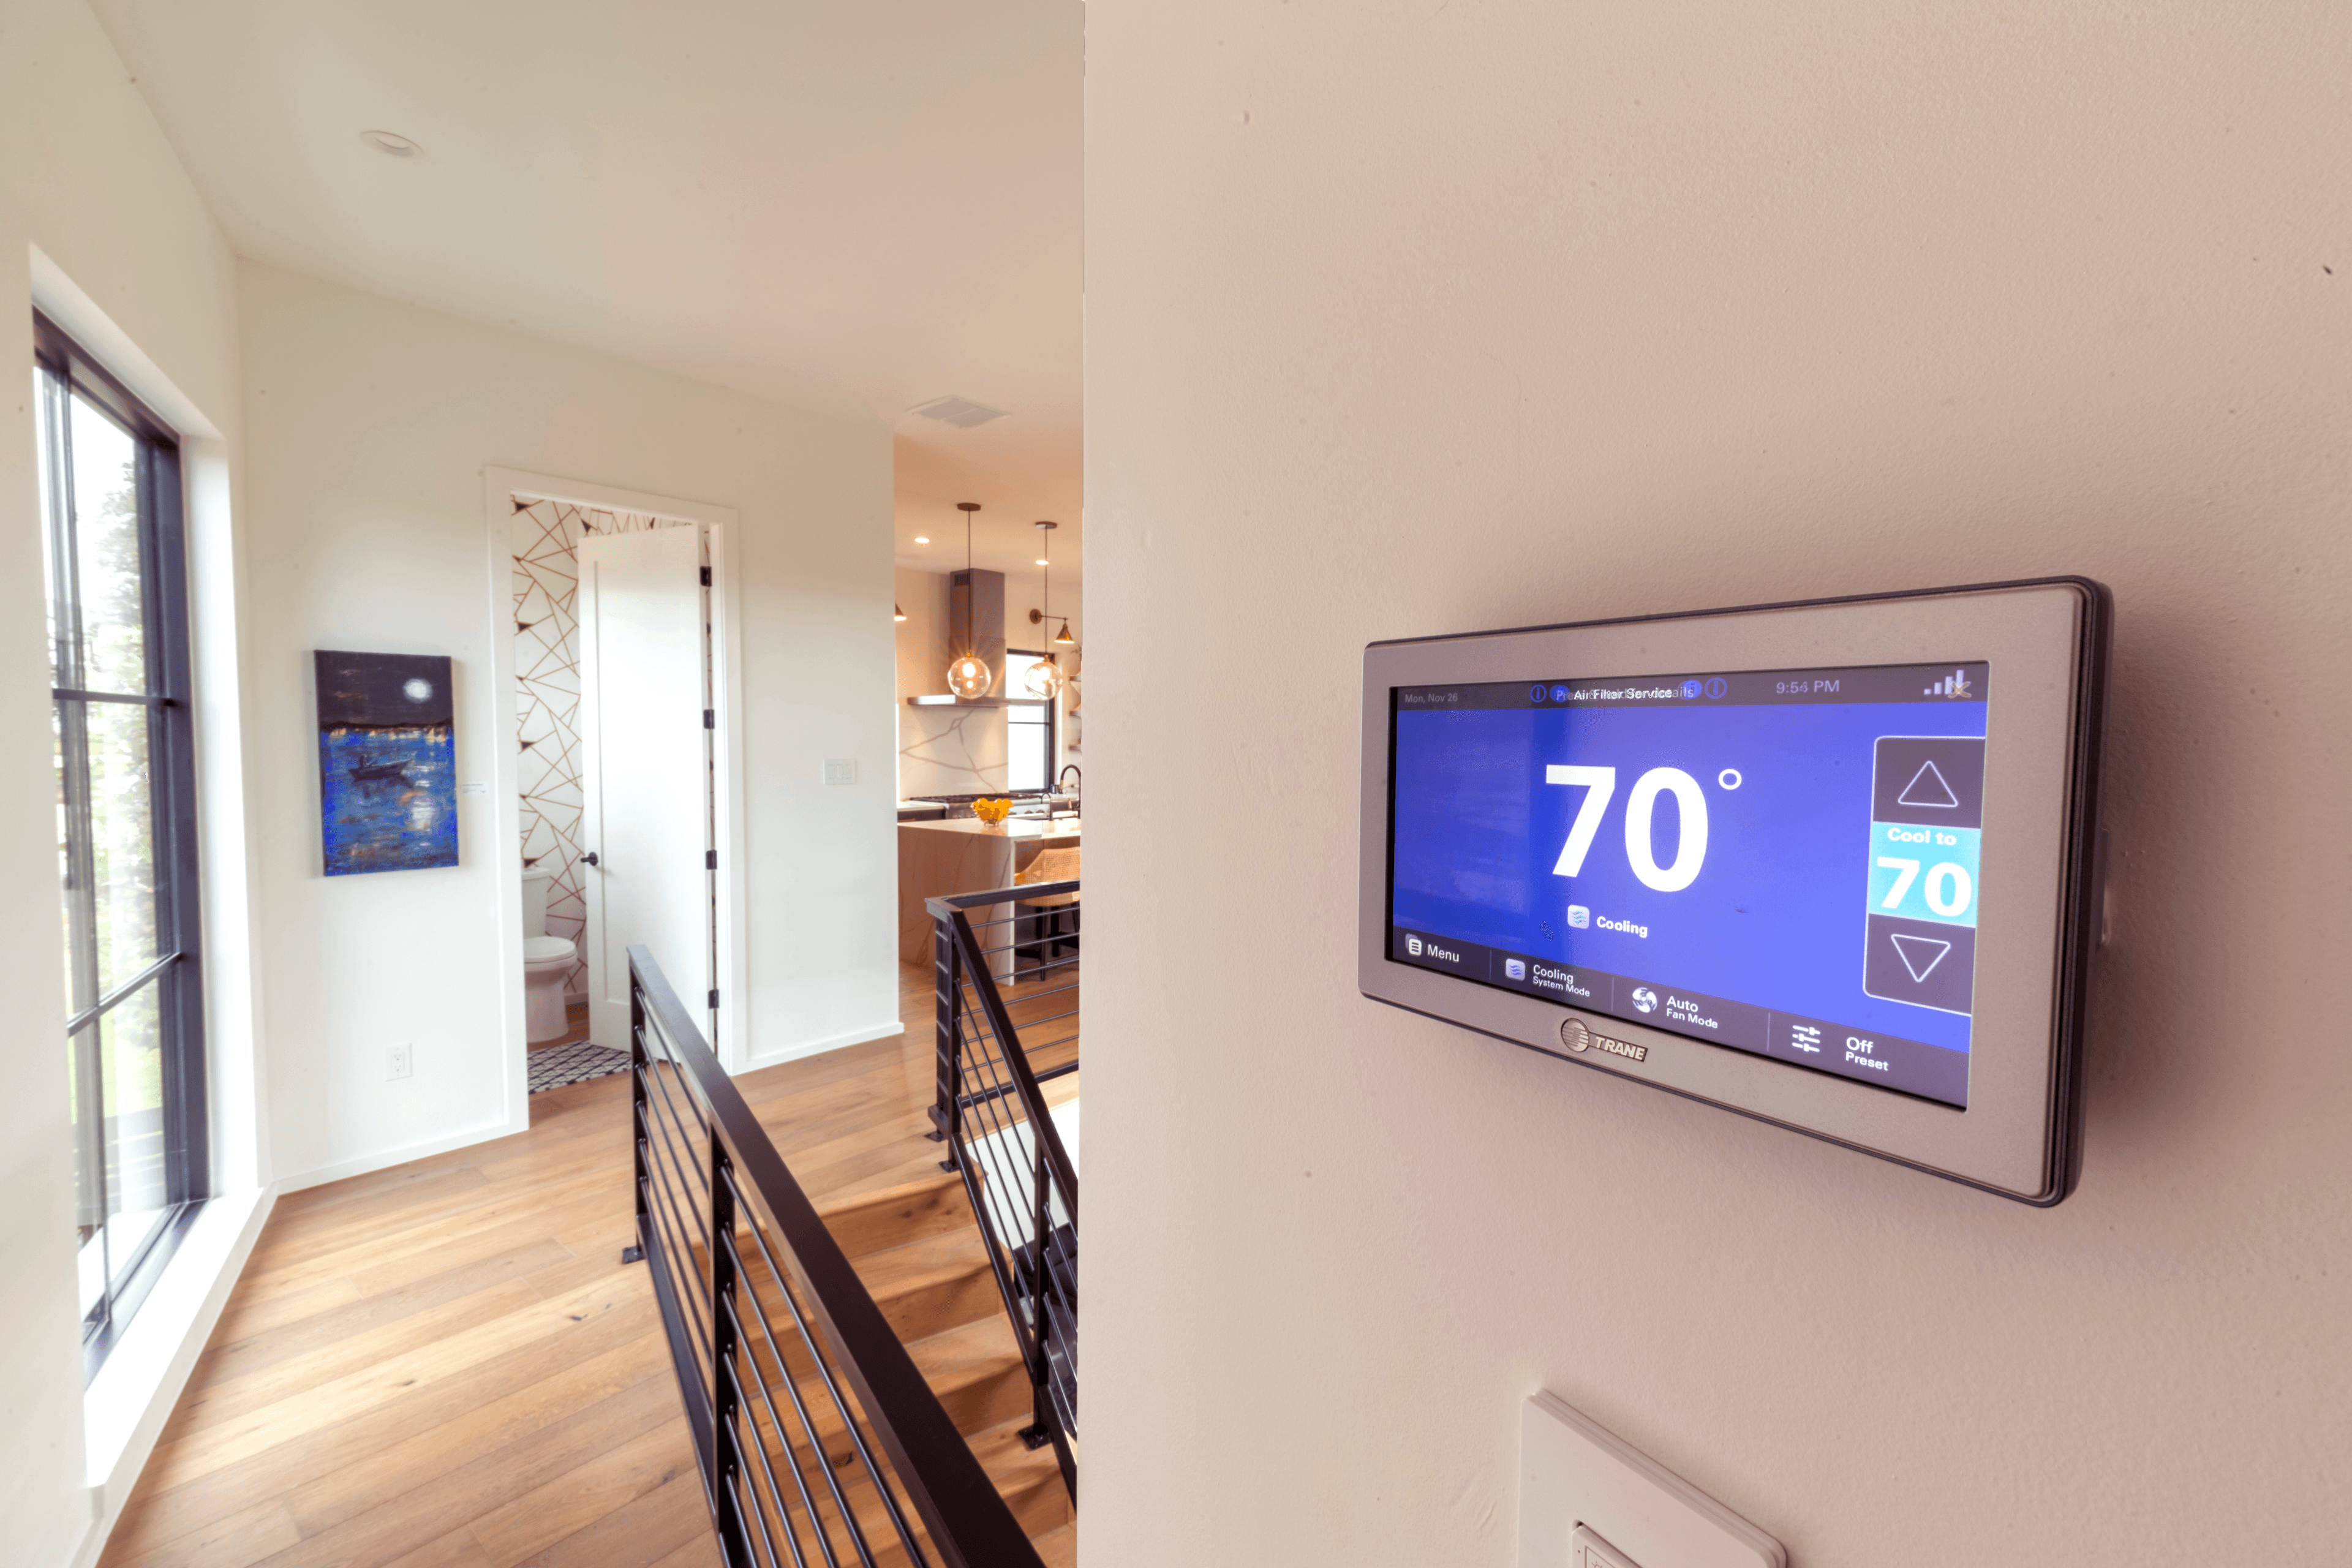 Trane Home App Takes Smarter Comfort to the Next Level